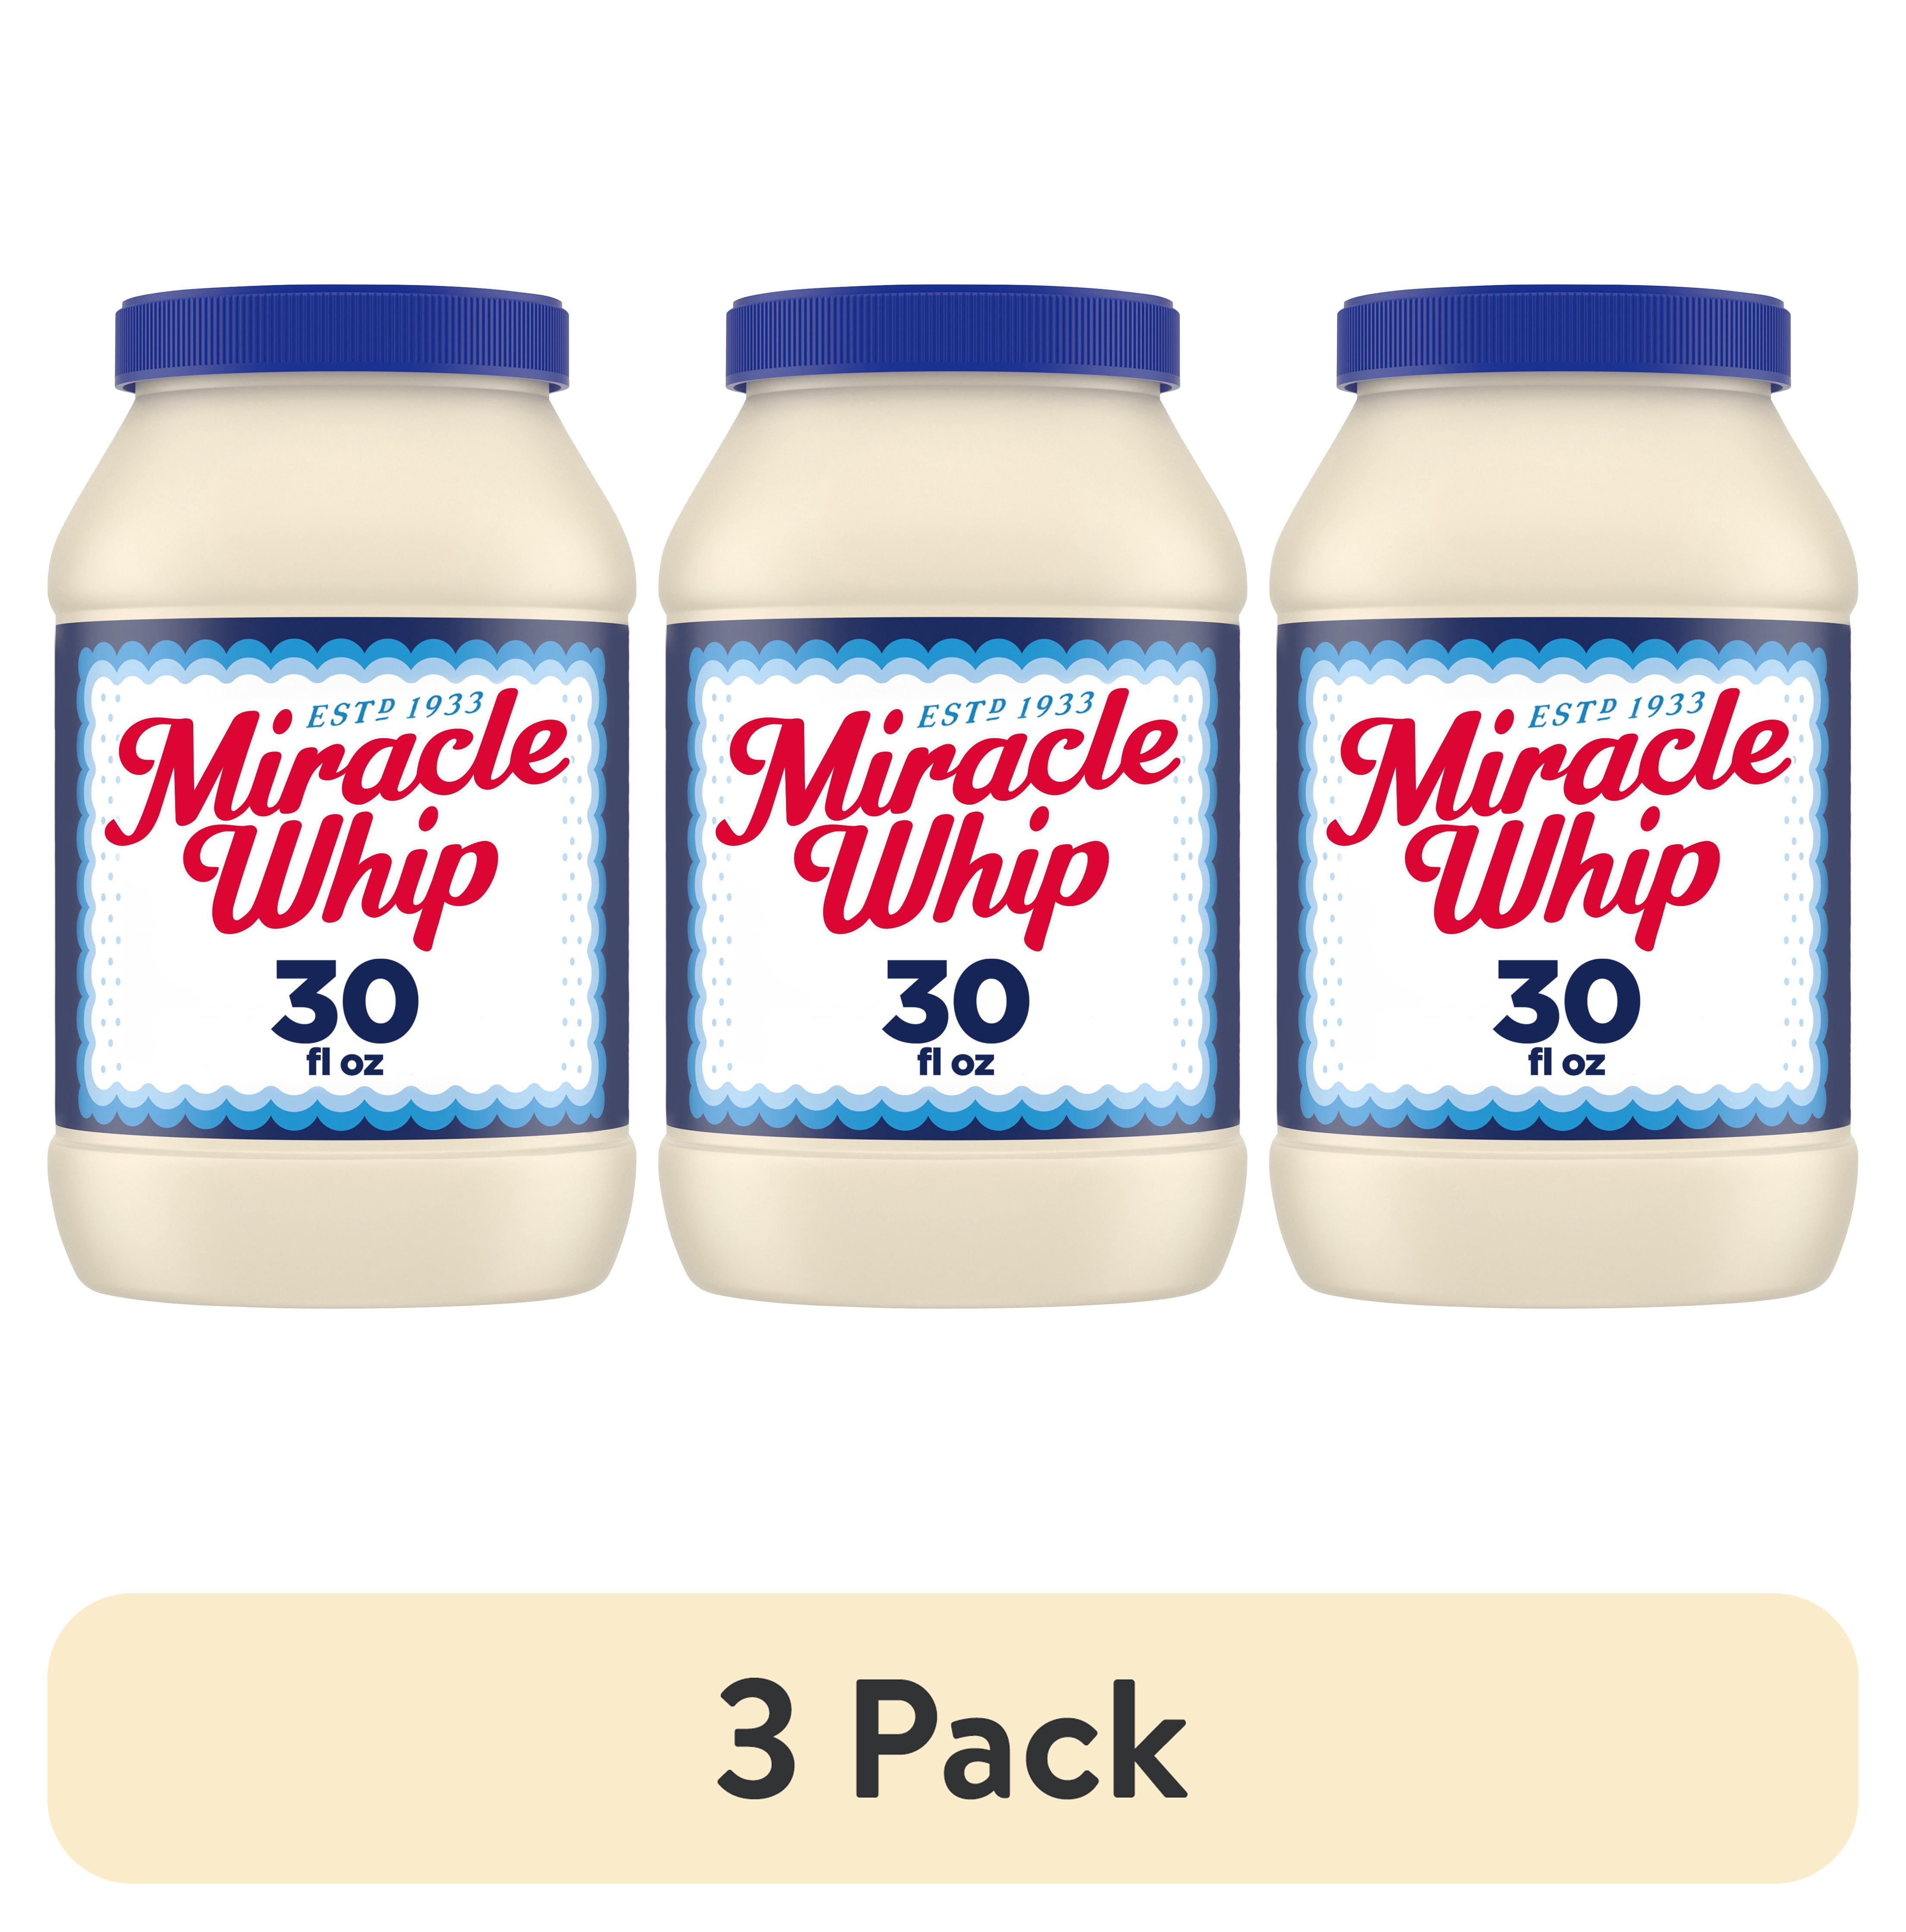 (3 pack) Miracle Whip Mayo-like Dressing, for a Keto and Low Carb Lifestyle, 30 fl oz Jar - image 1 of 19